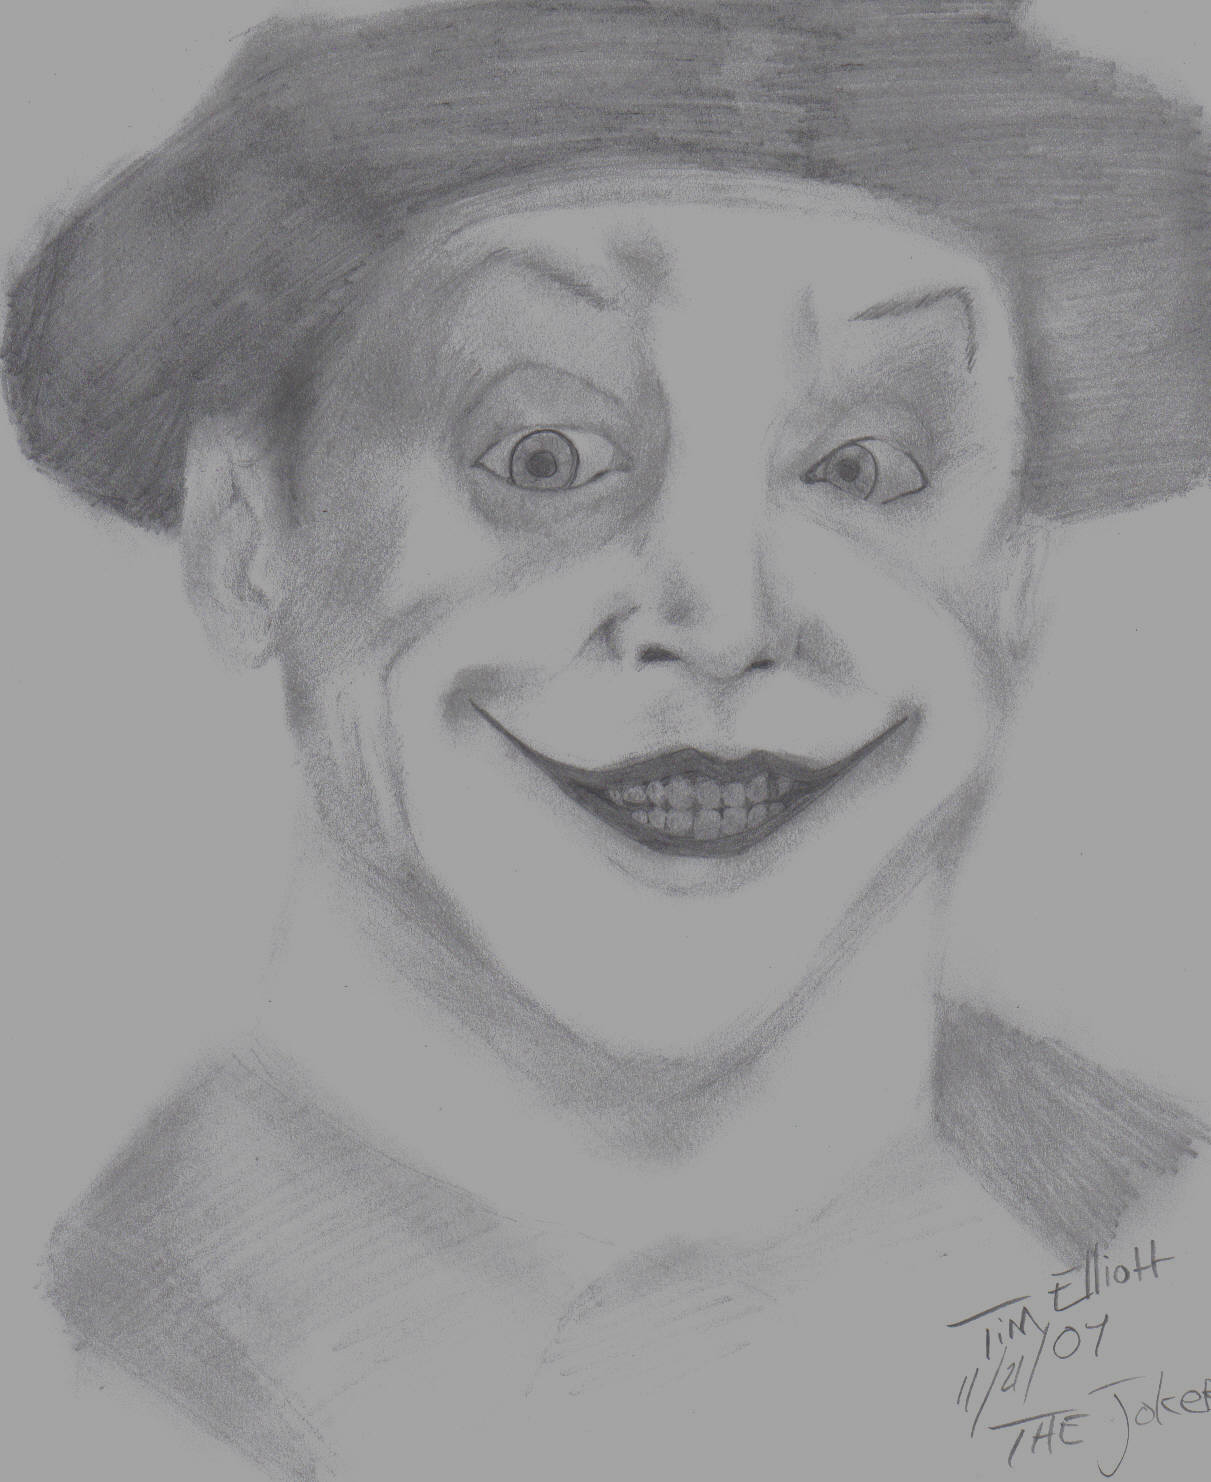 Just call me the Joker!" by TimE